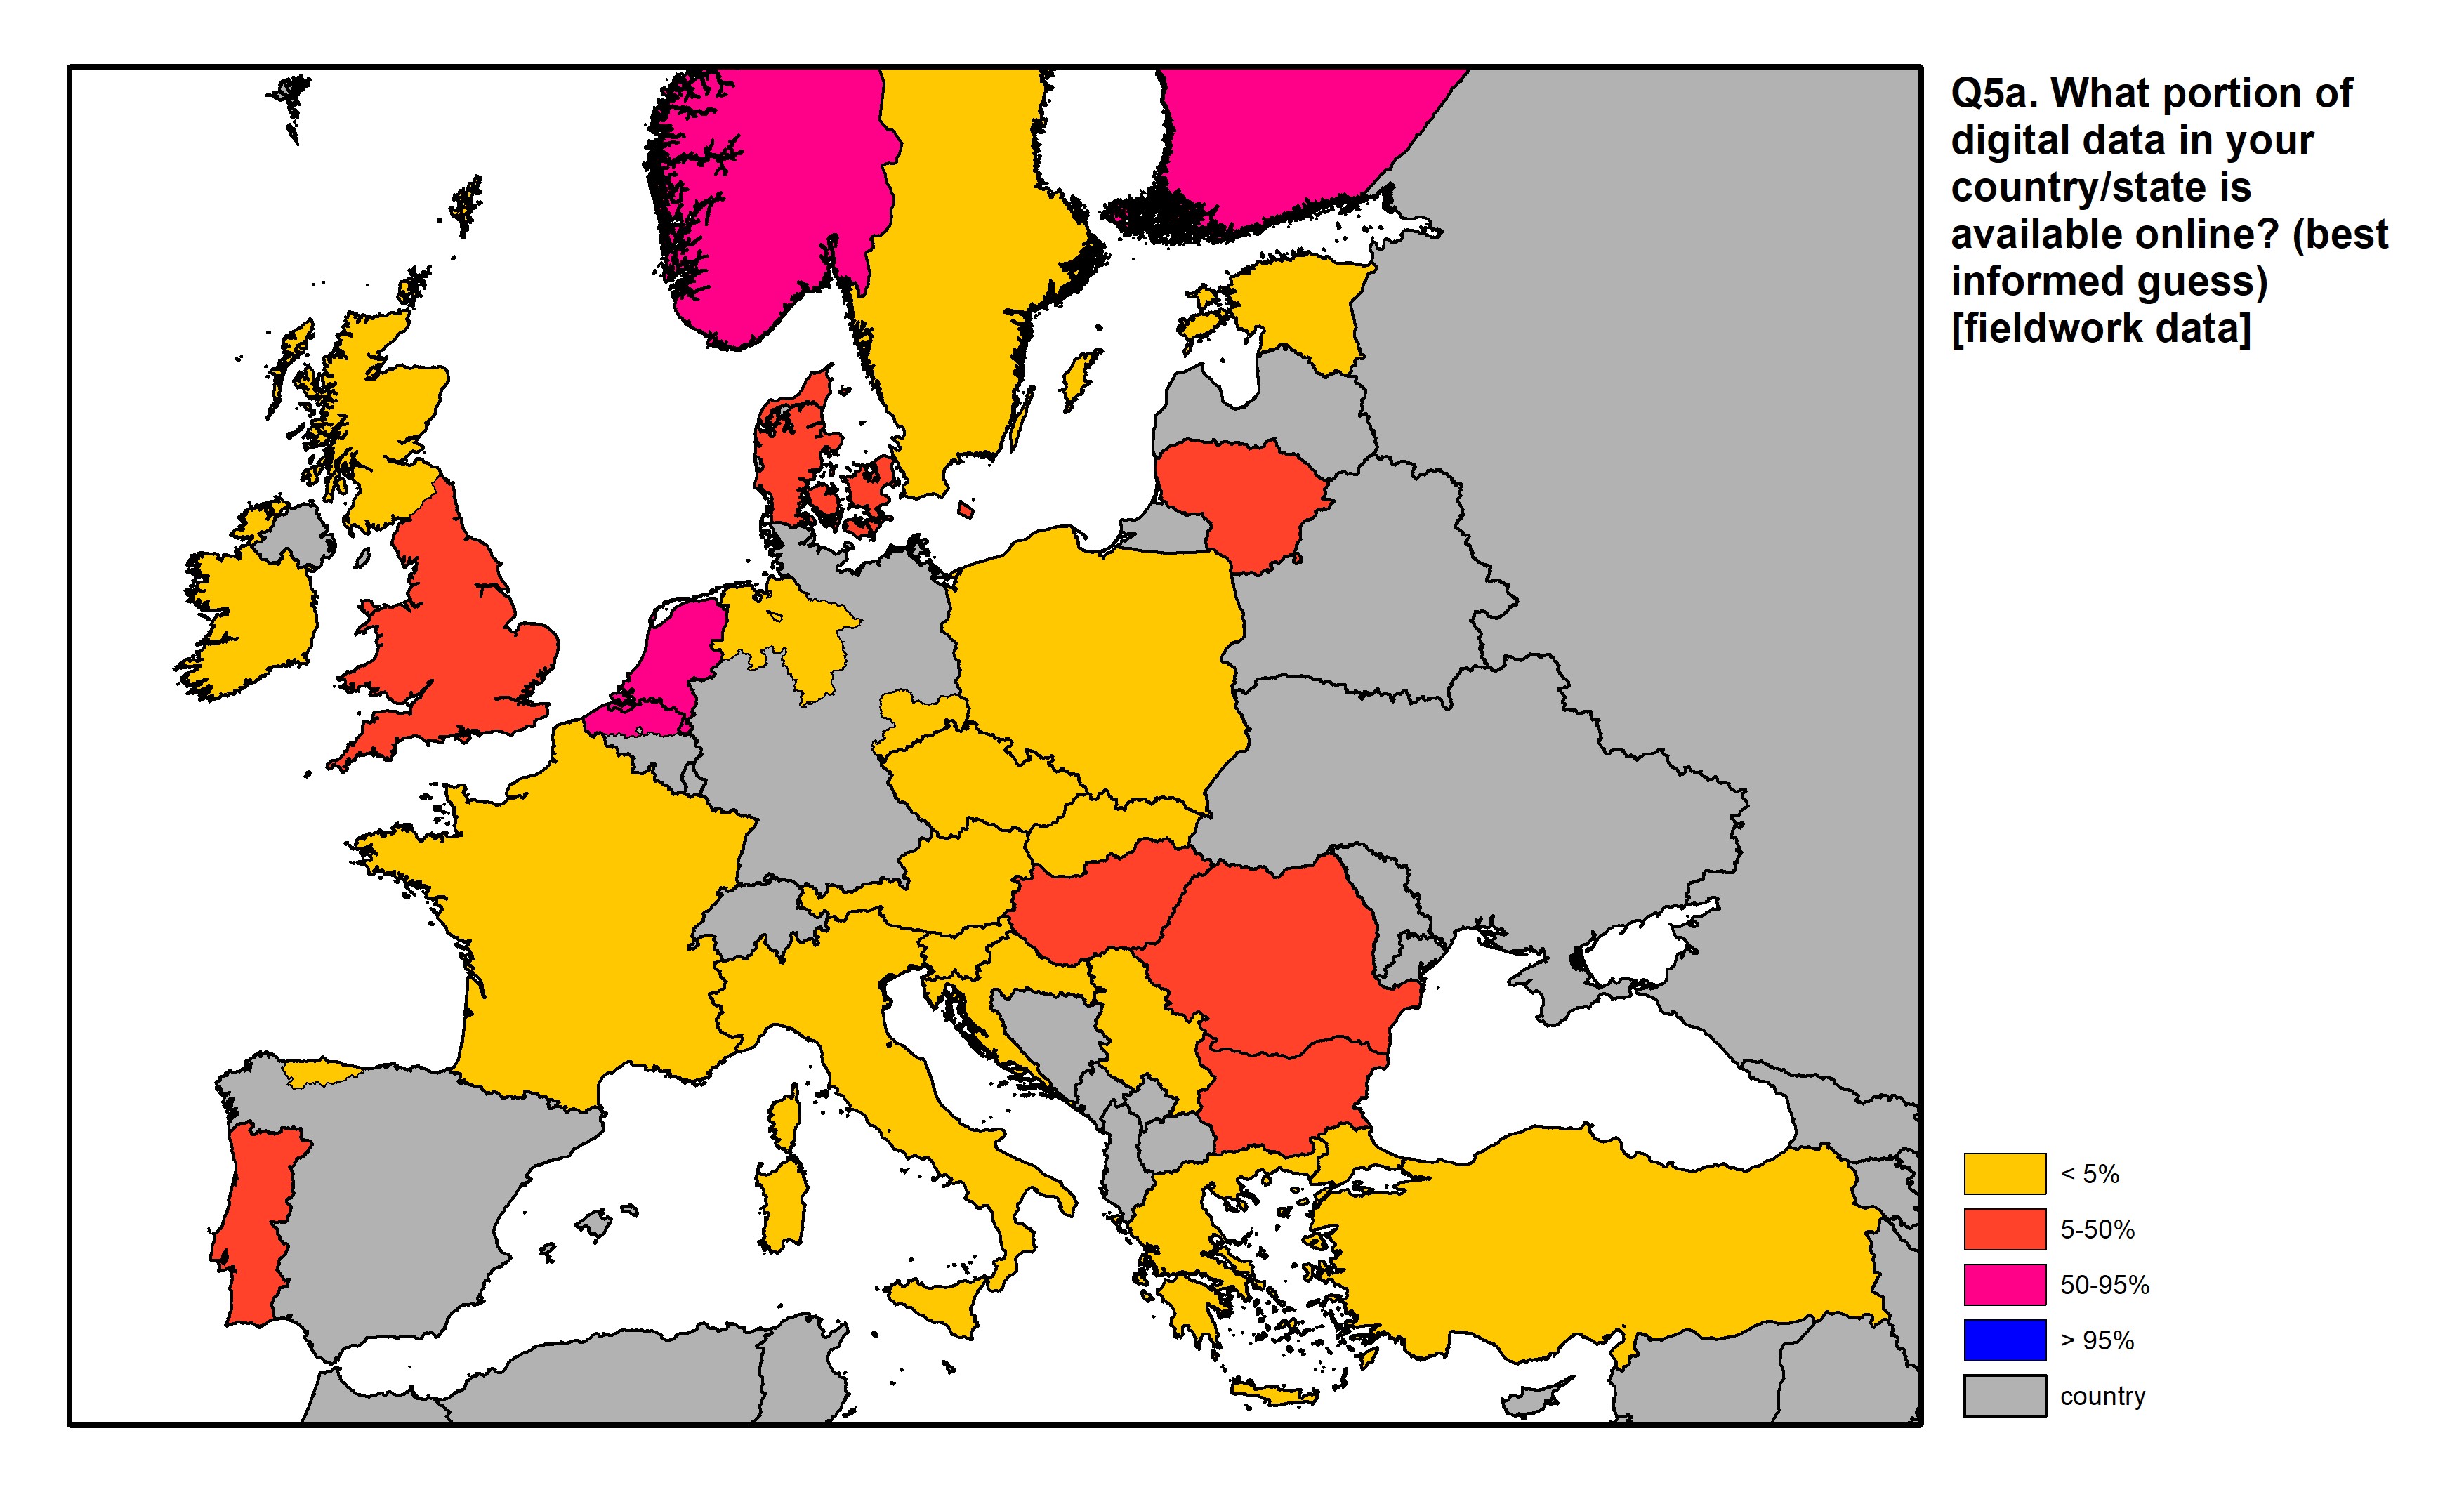 Figure 15: a map of Europe showing countries and regions in colour based on response rates to the survey question.